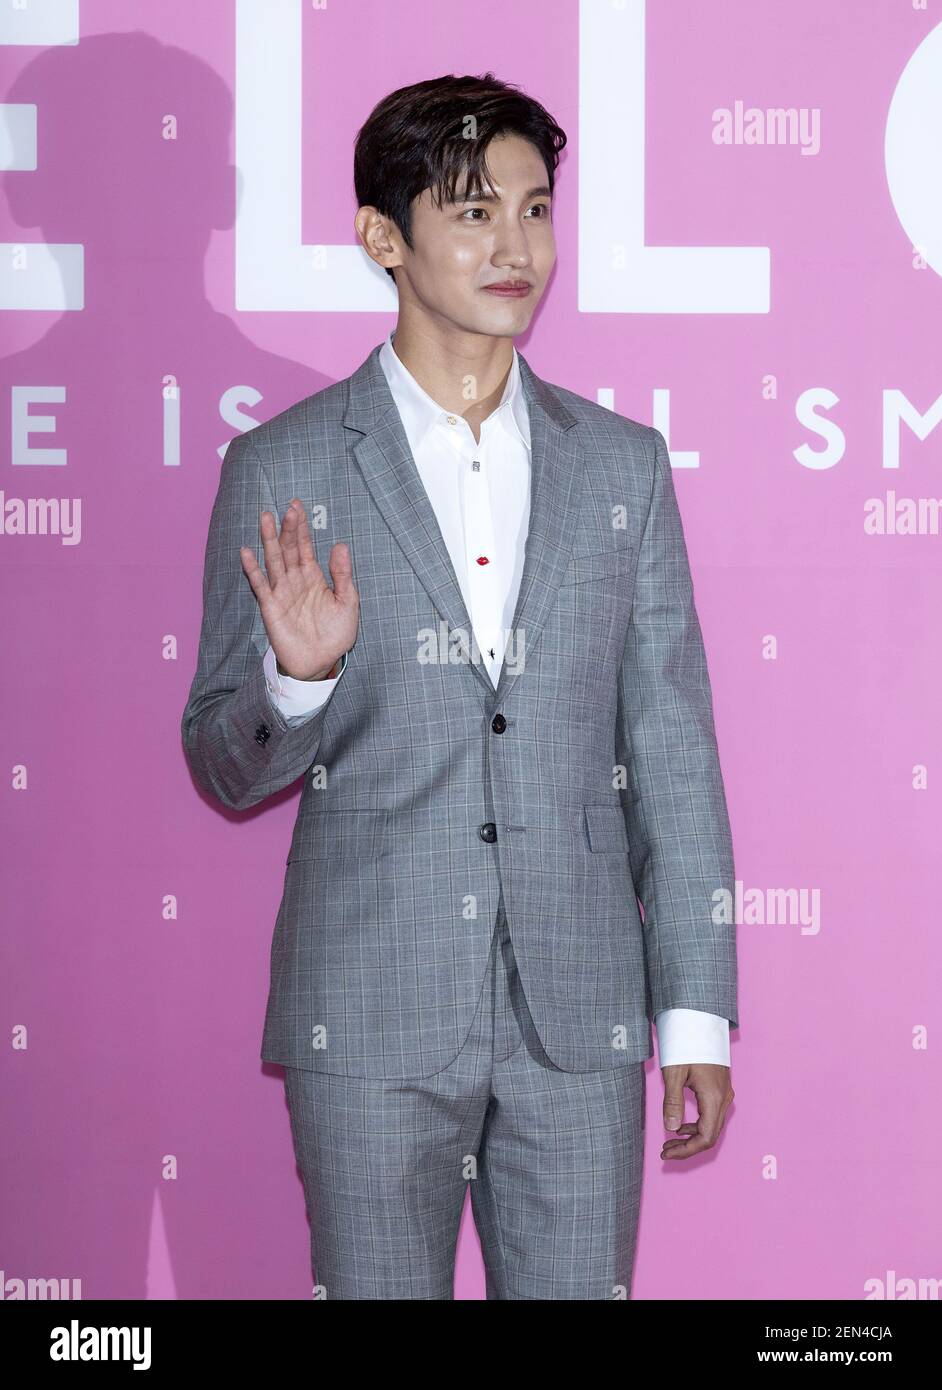 5 June 2019 - Seoul, South Korea : South Korean singer Max Changmin, member  of K-Pop duo TVXQ, attends a photo call for the DDP 5 year Anniversary  'Hello, My Name is